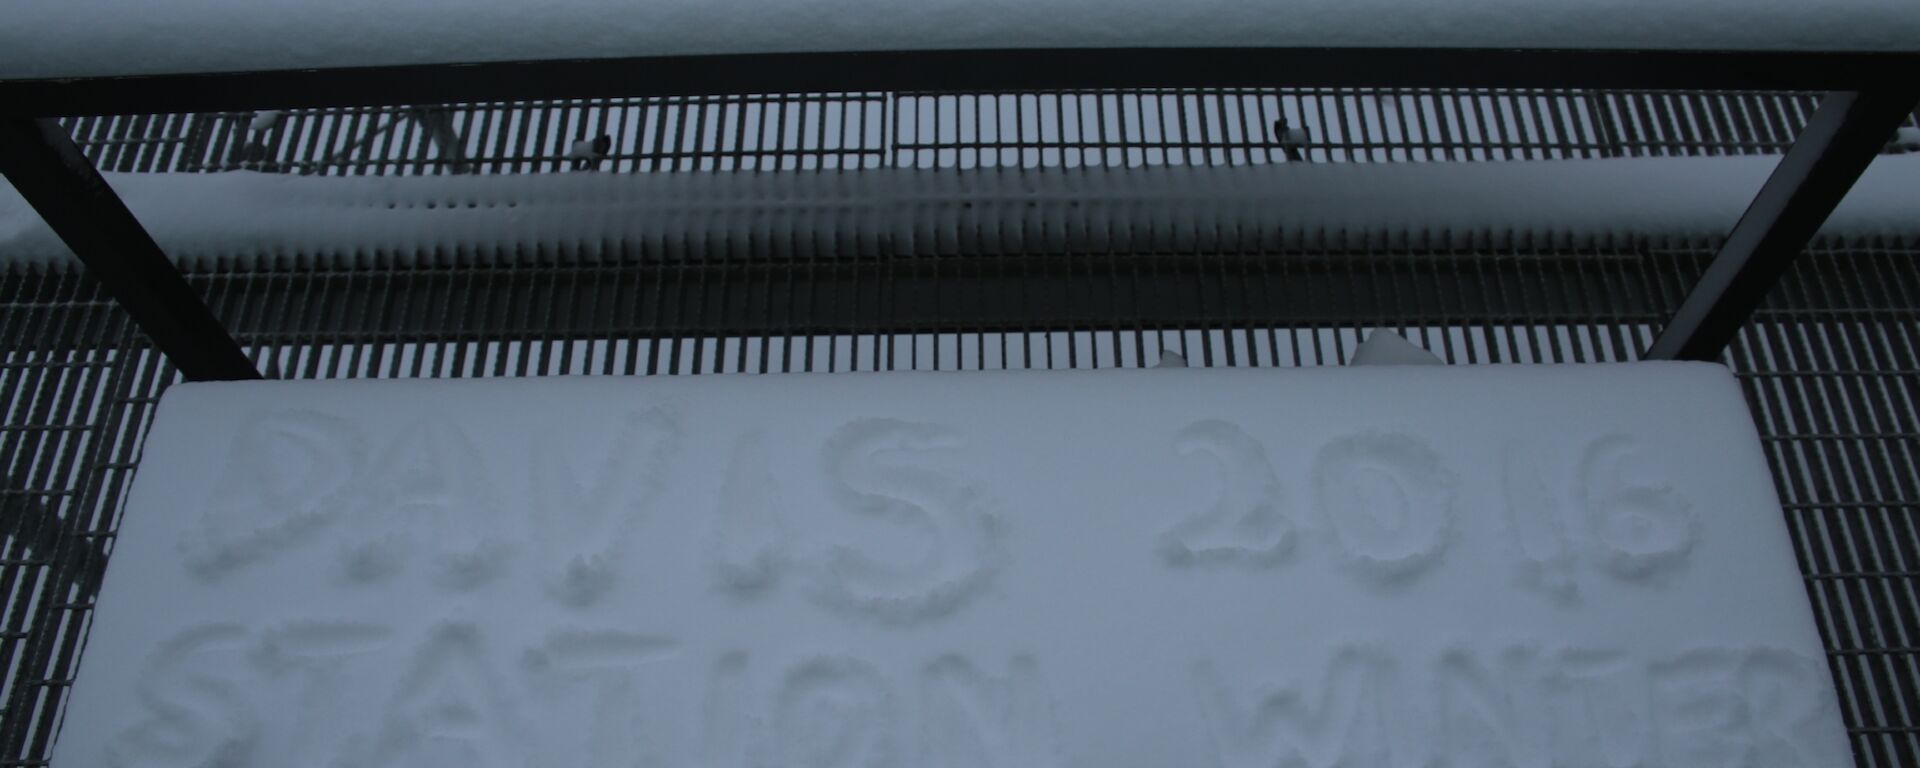 Seat on the balcony at Davis topped with fresh snow that then has ‘Davis Station 2016 Winter’ written on it